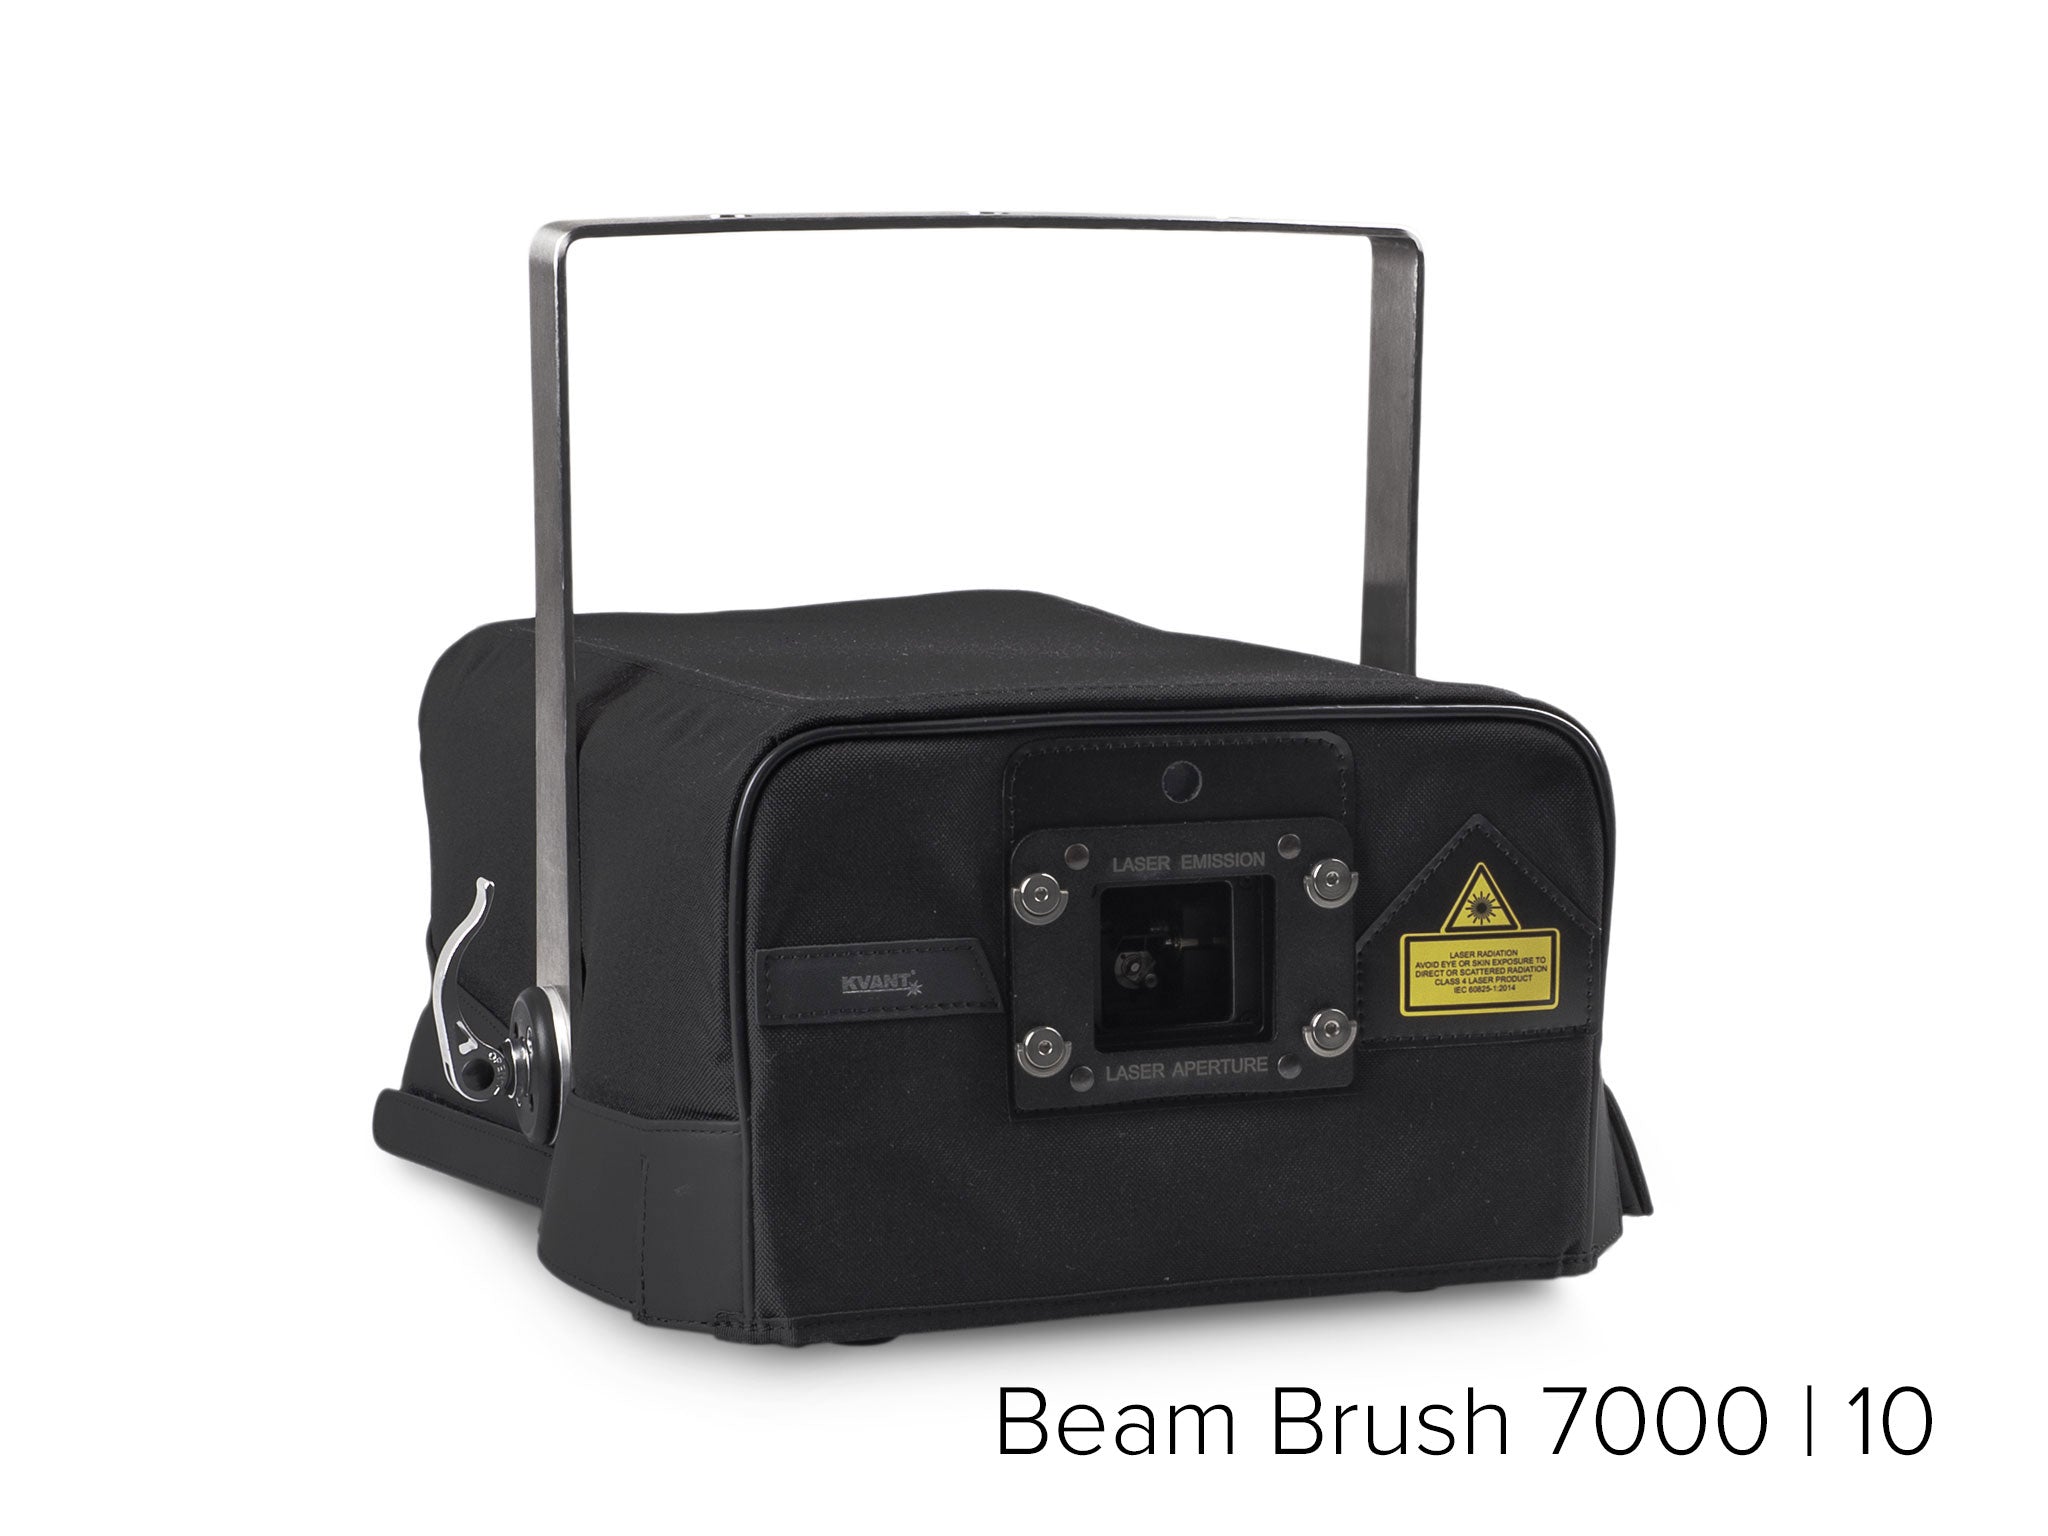 Rain cover for Kvant lasers Beam Brush 7000 and 10